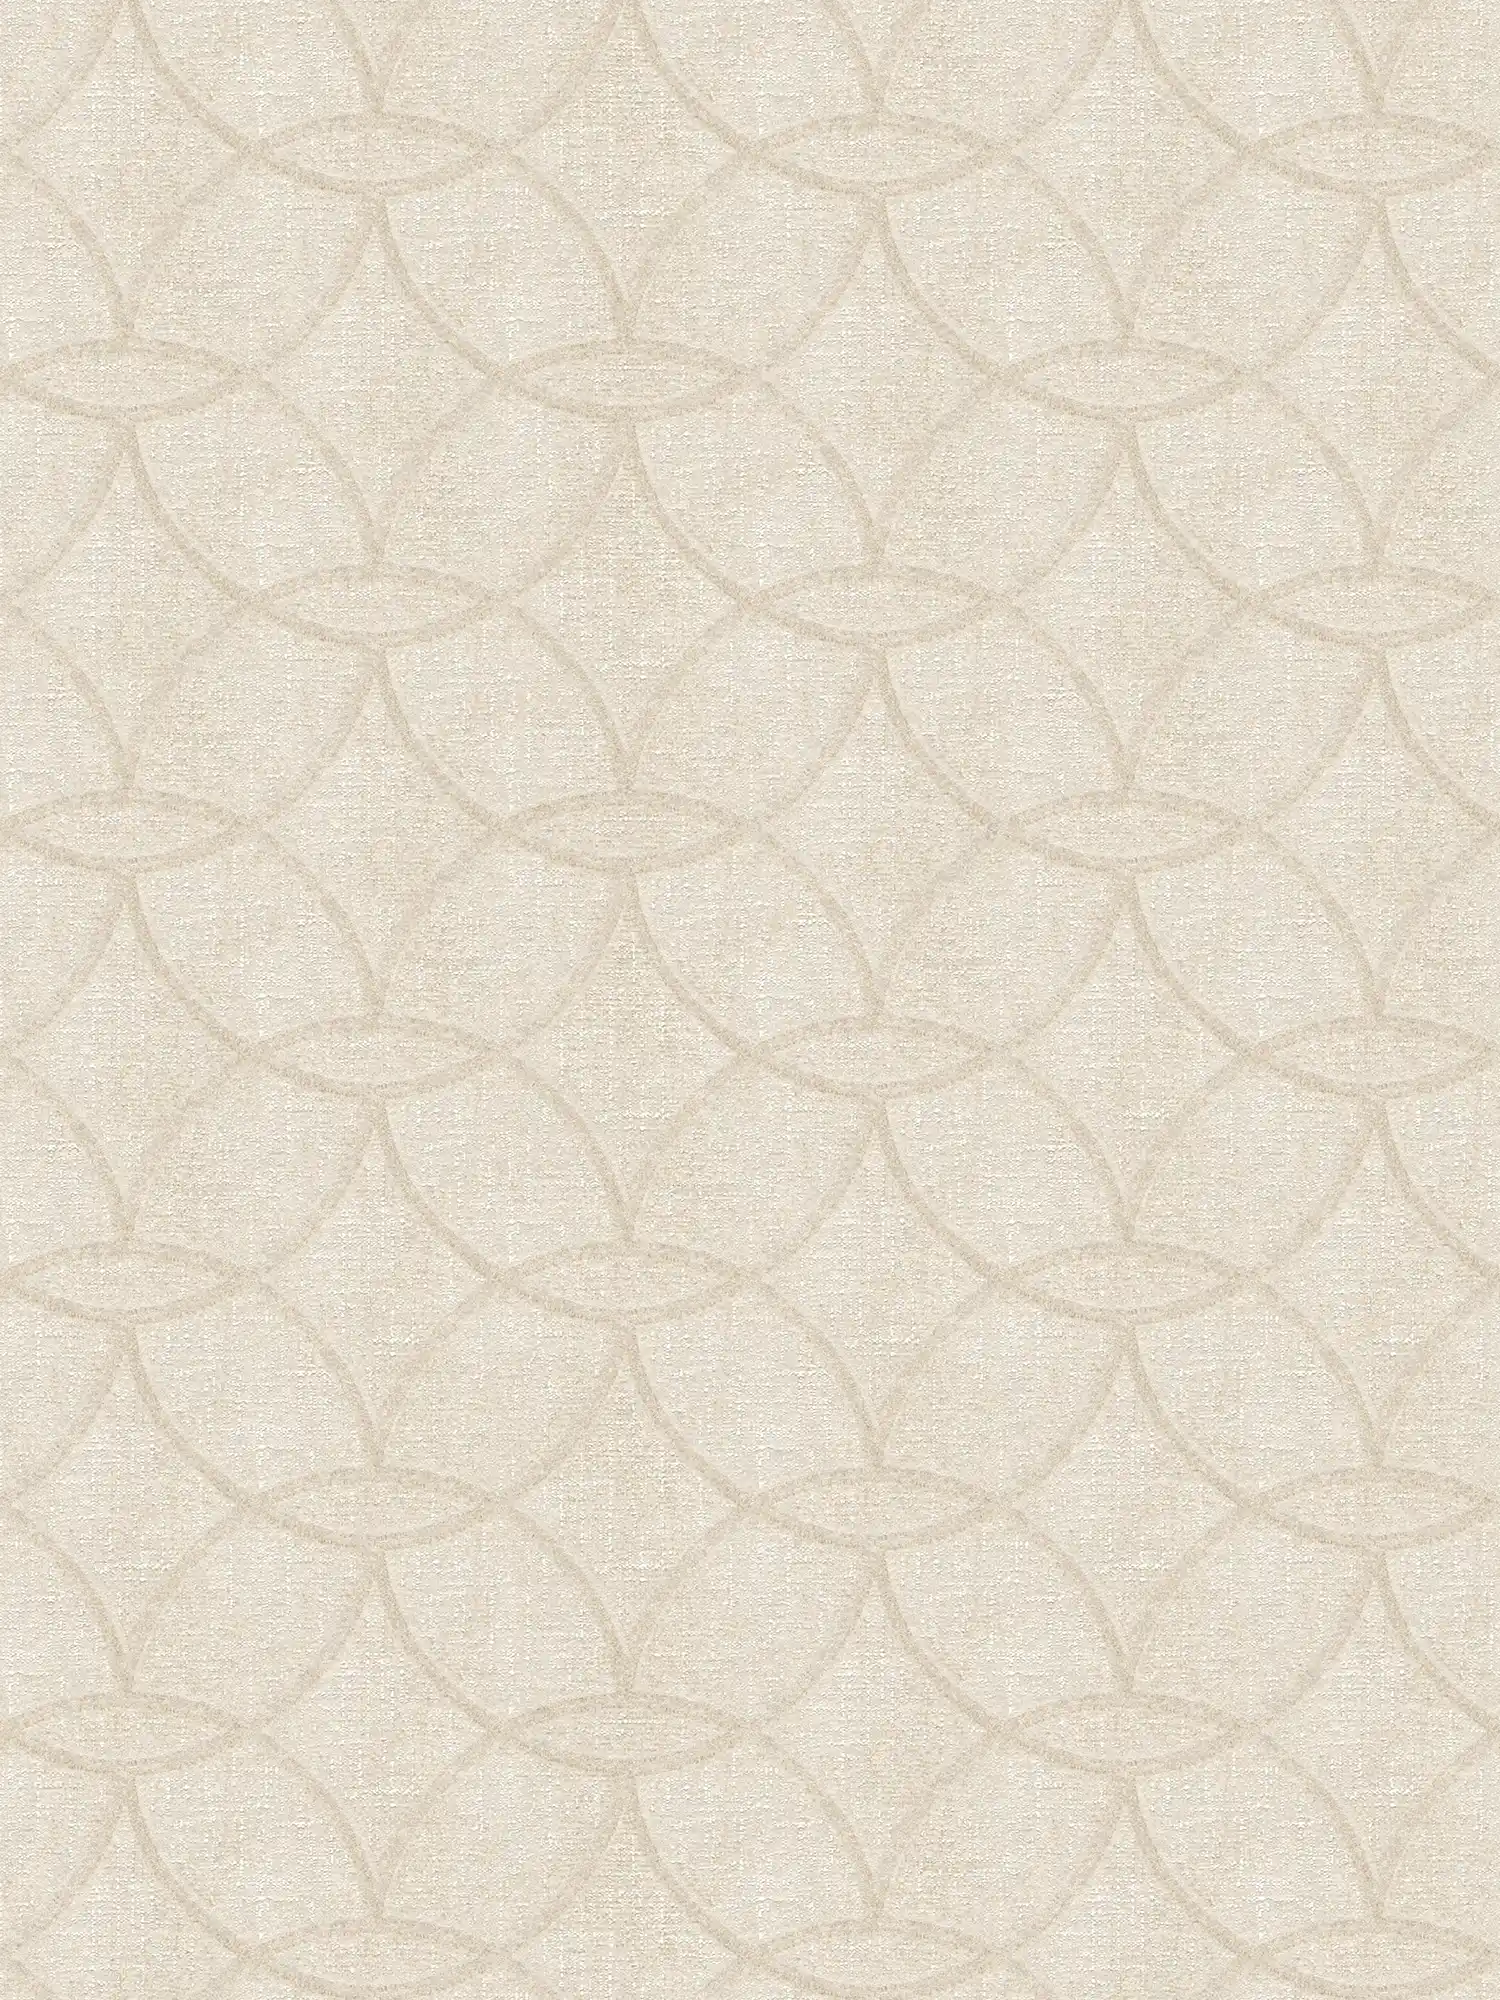 Retro wallpaper with geometric pattern with shine & shimmer effect - beige
